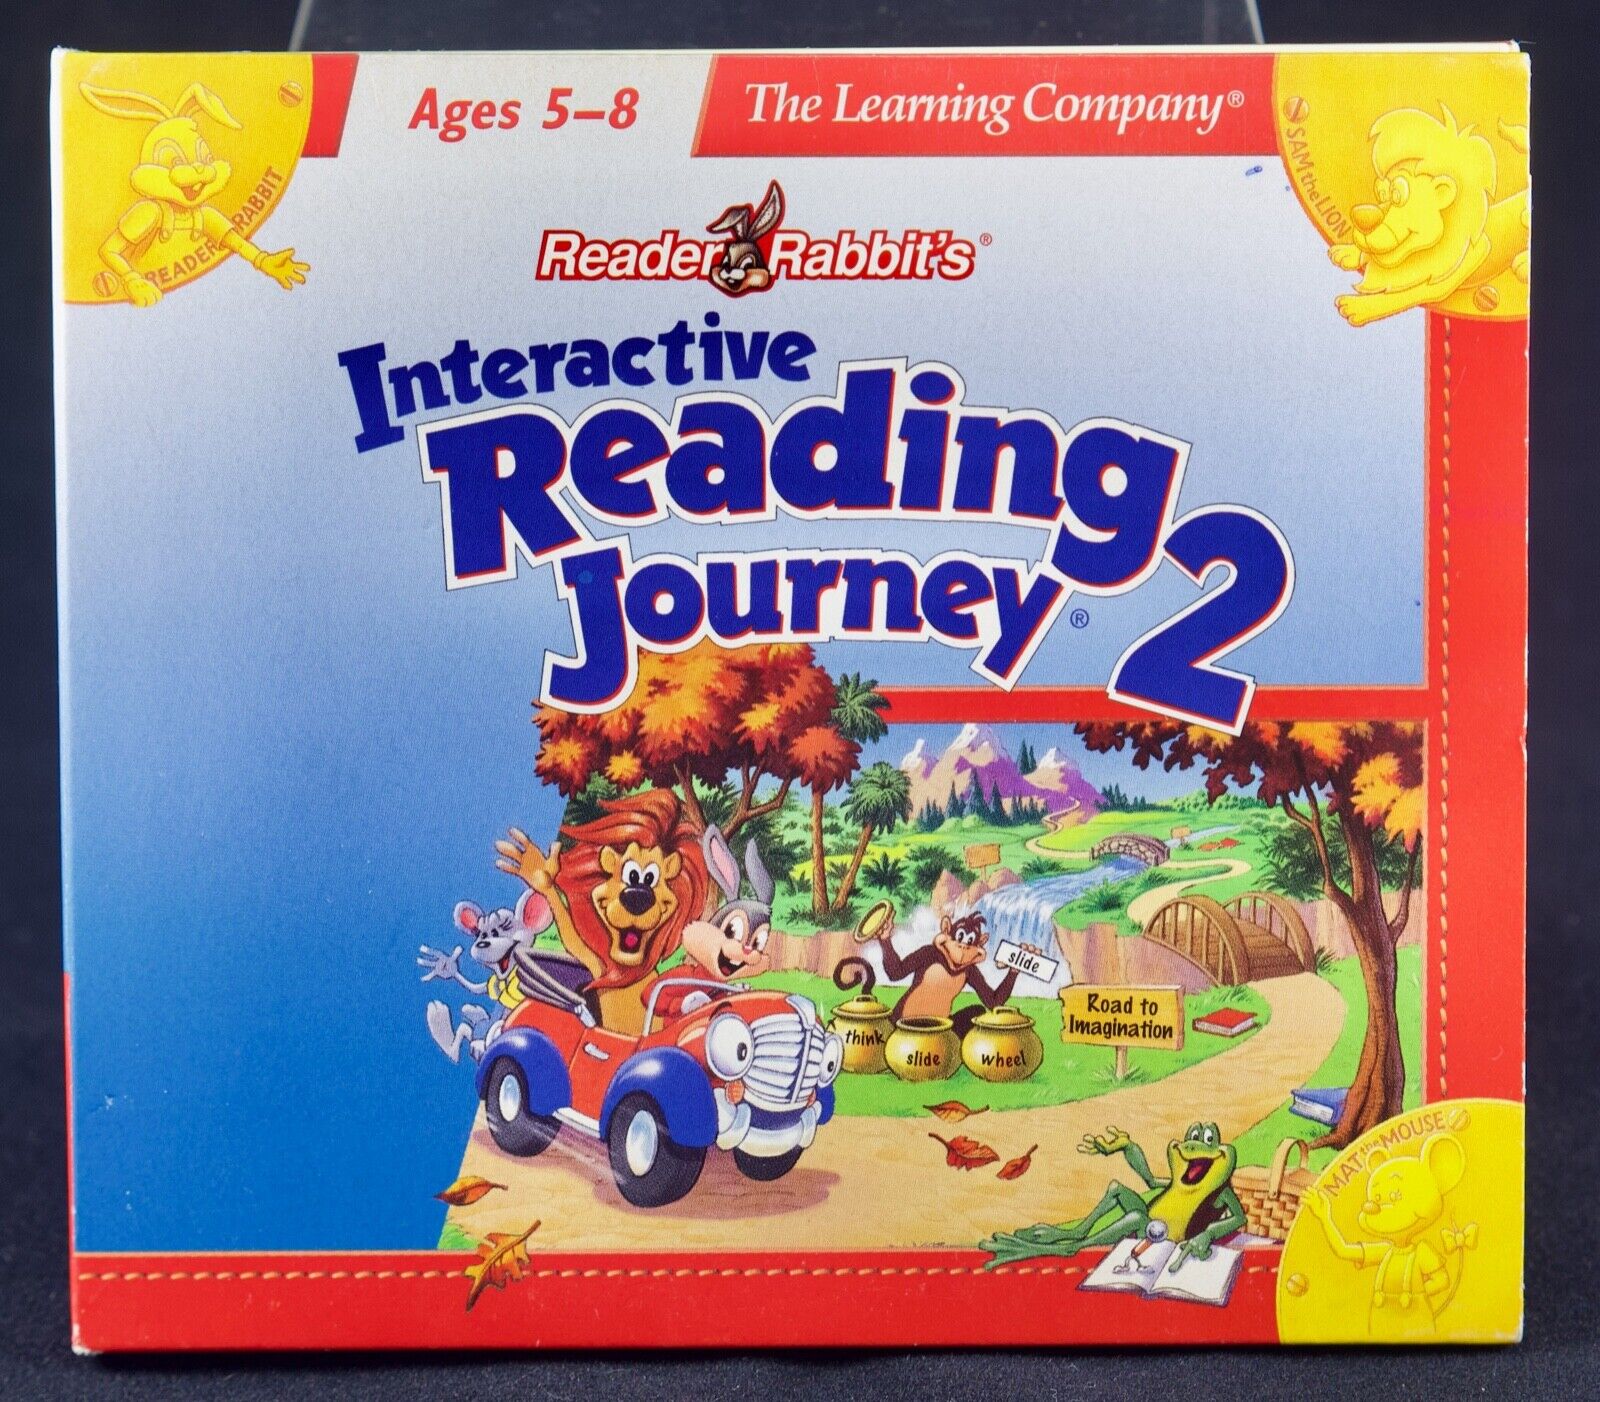 The Learning Company: Reader Rabbit’s Interactive Reading Journey 2 CD Ages 5-8